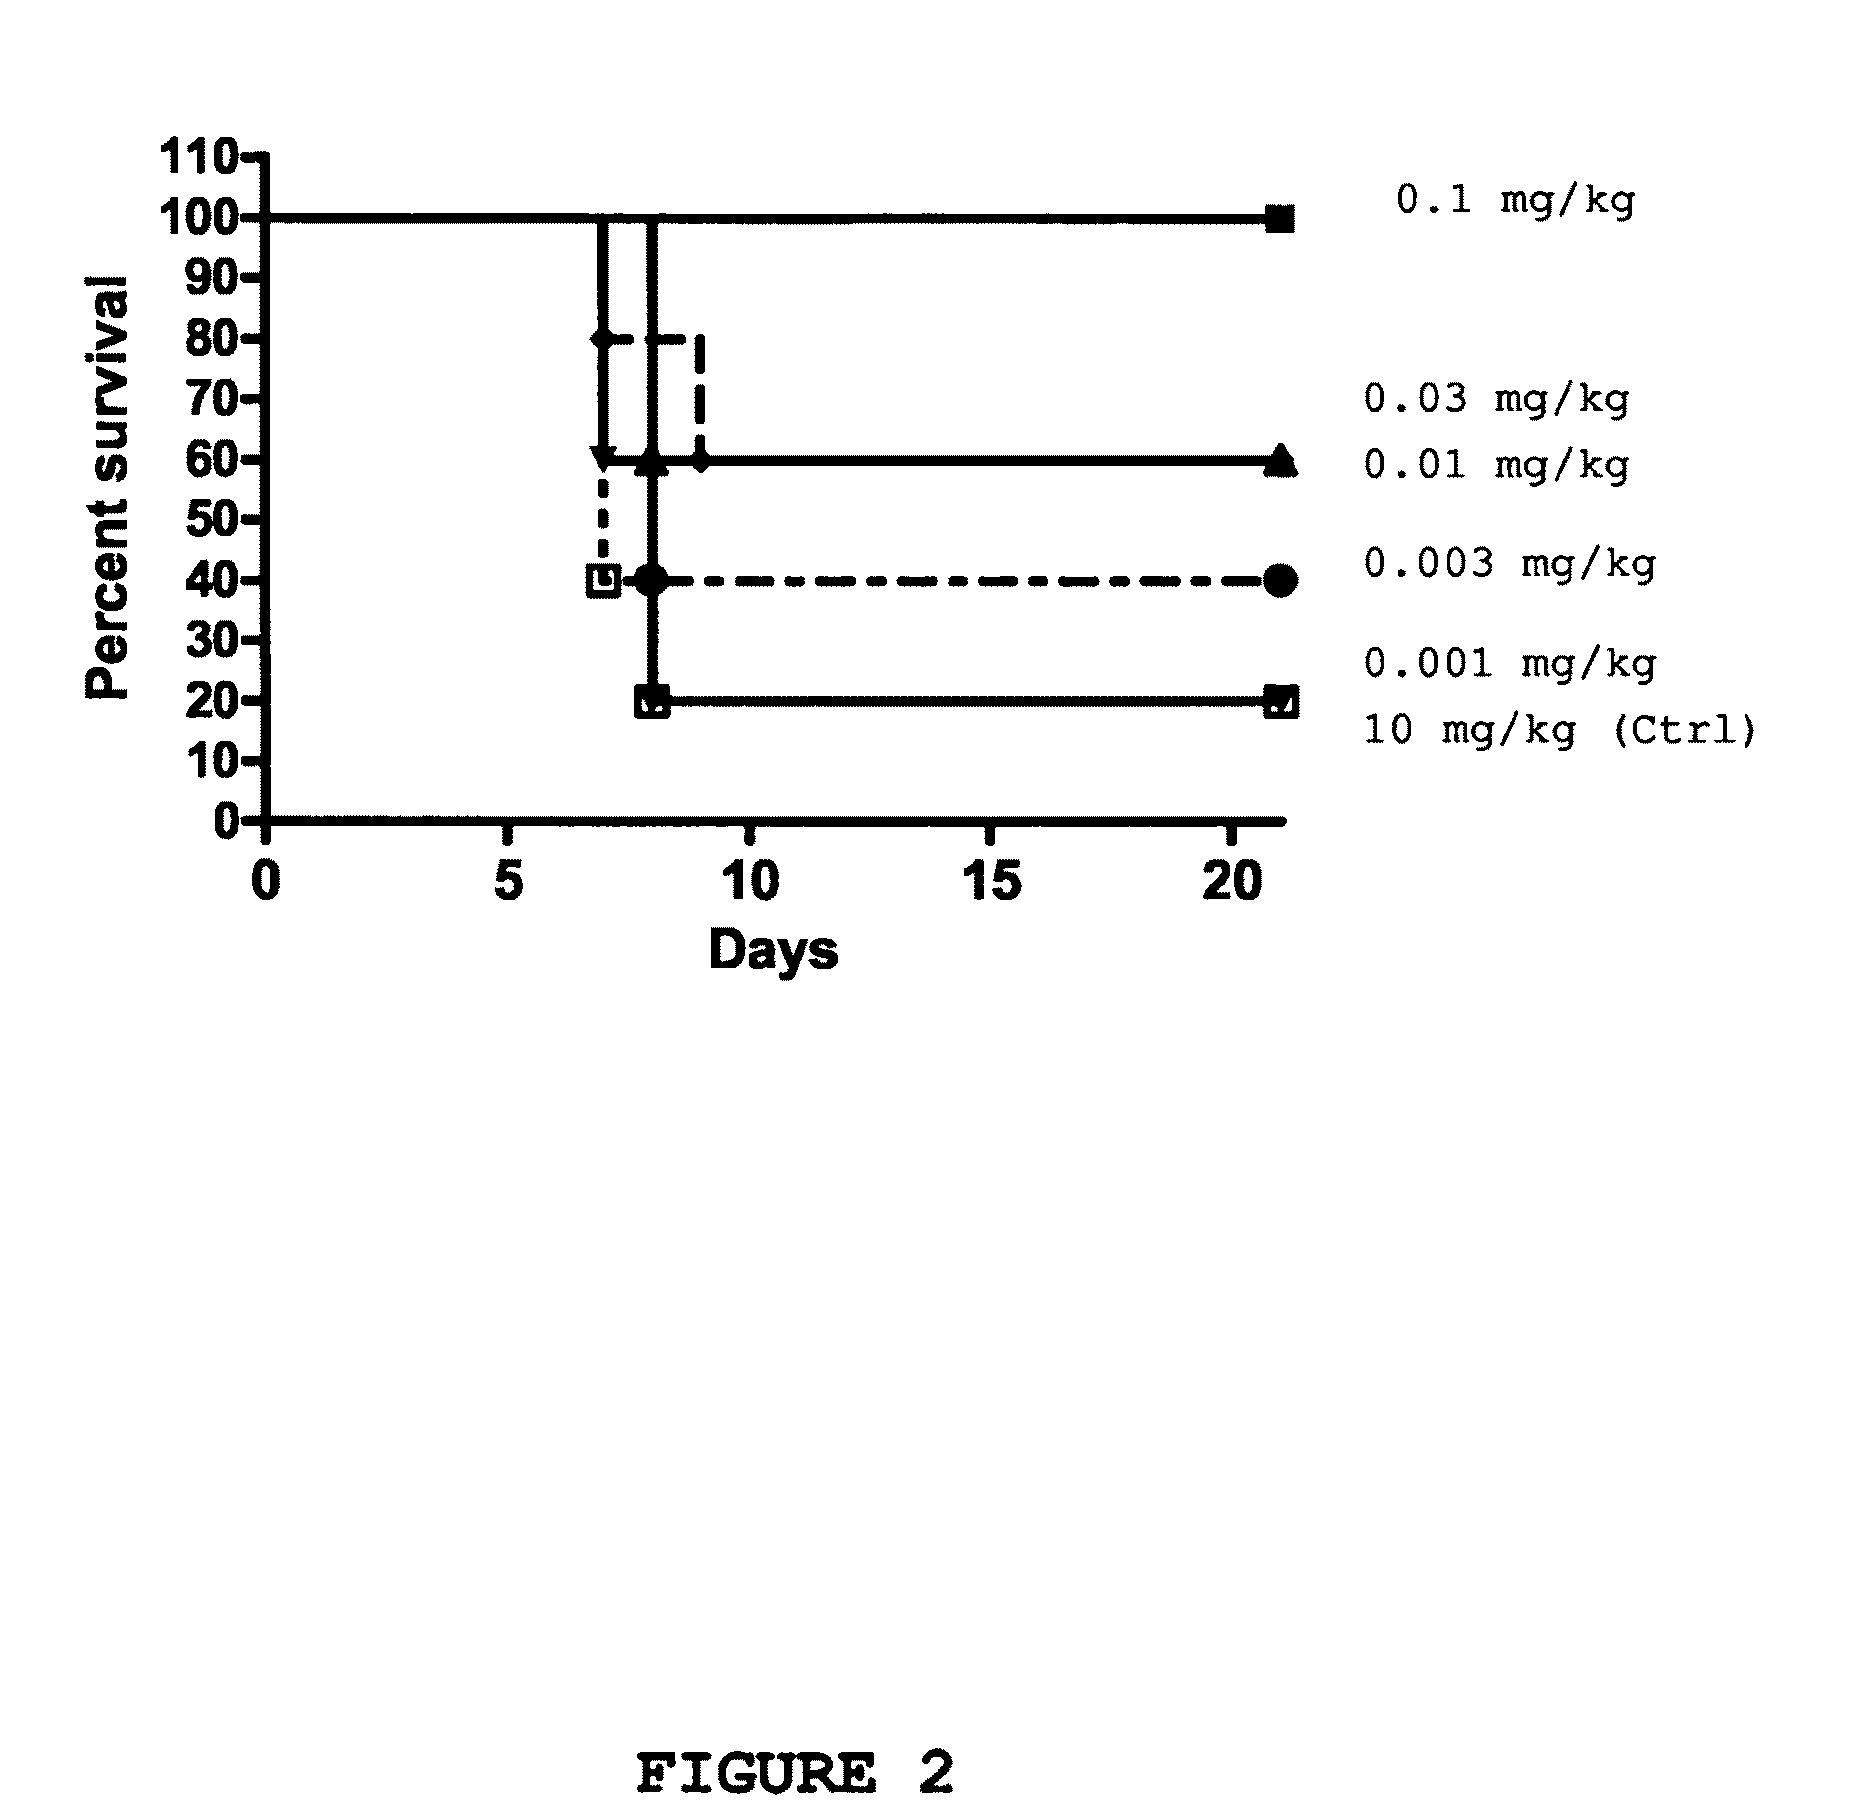 Host cell specific binding molecules capable of neutralizing viruses and uses thereof